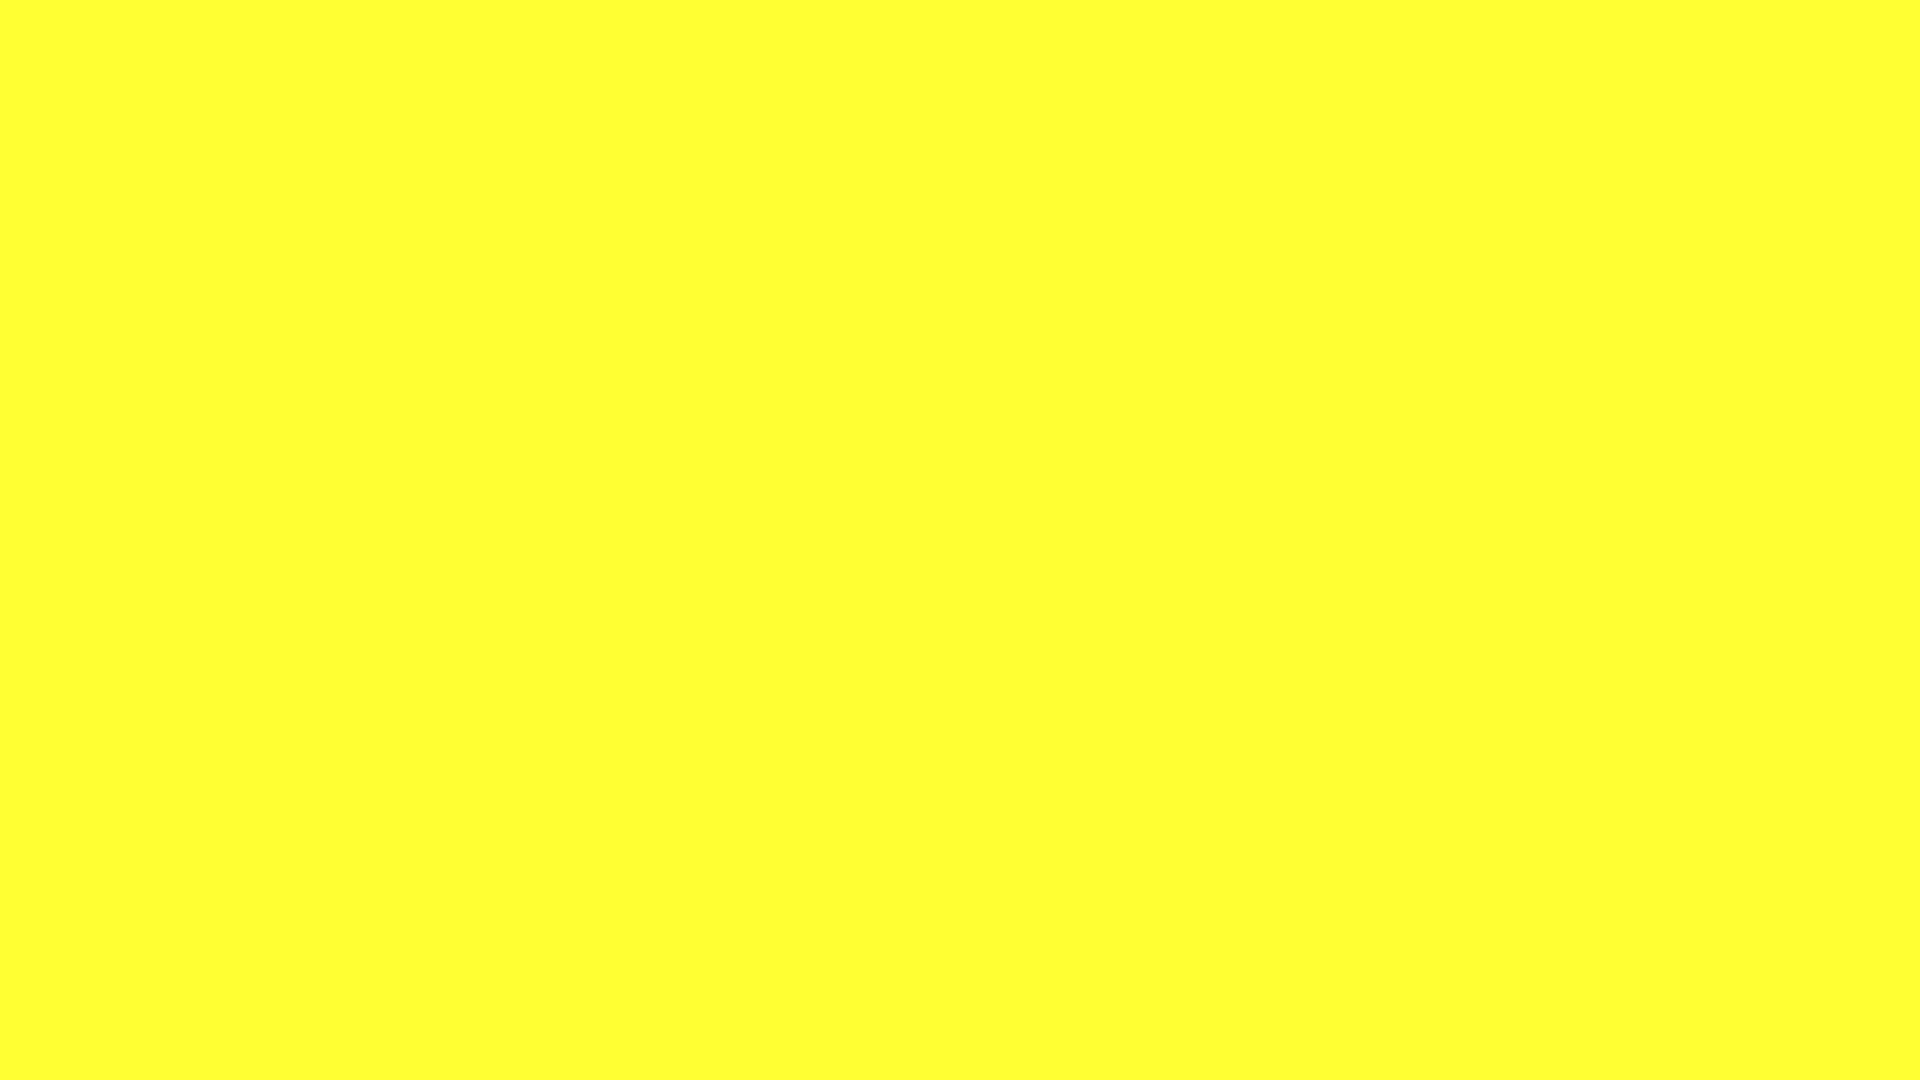 Wallpaper Plain Yellow Desktop with resolution 1920X1080 pixel. You can use this wallpaper as background for your desktop Computer Screensavers, Android or iPhone smartphones